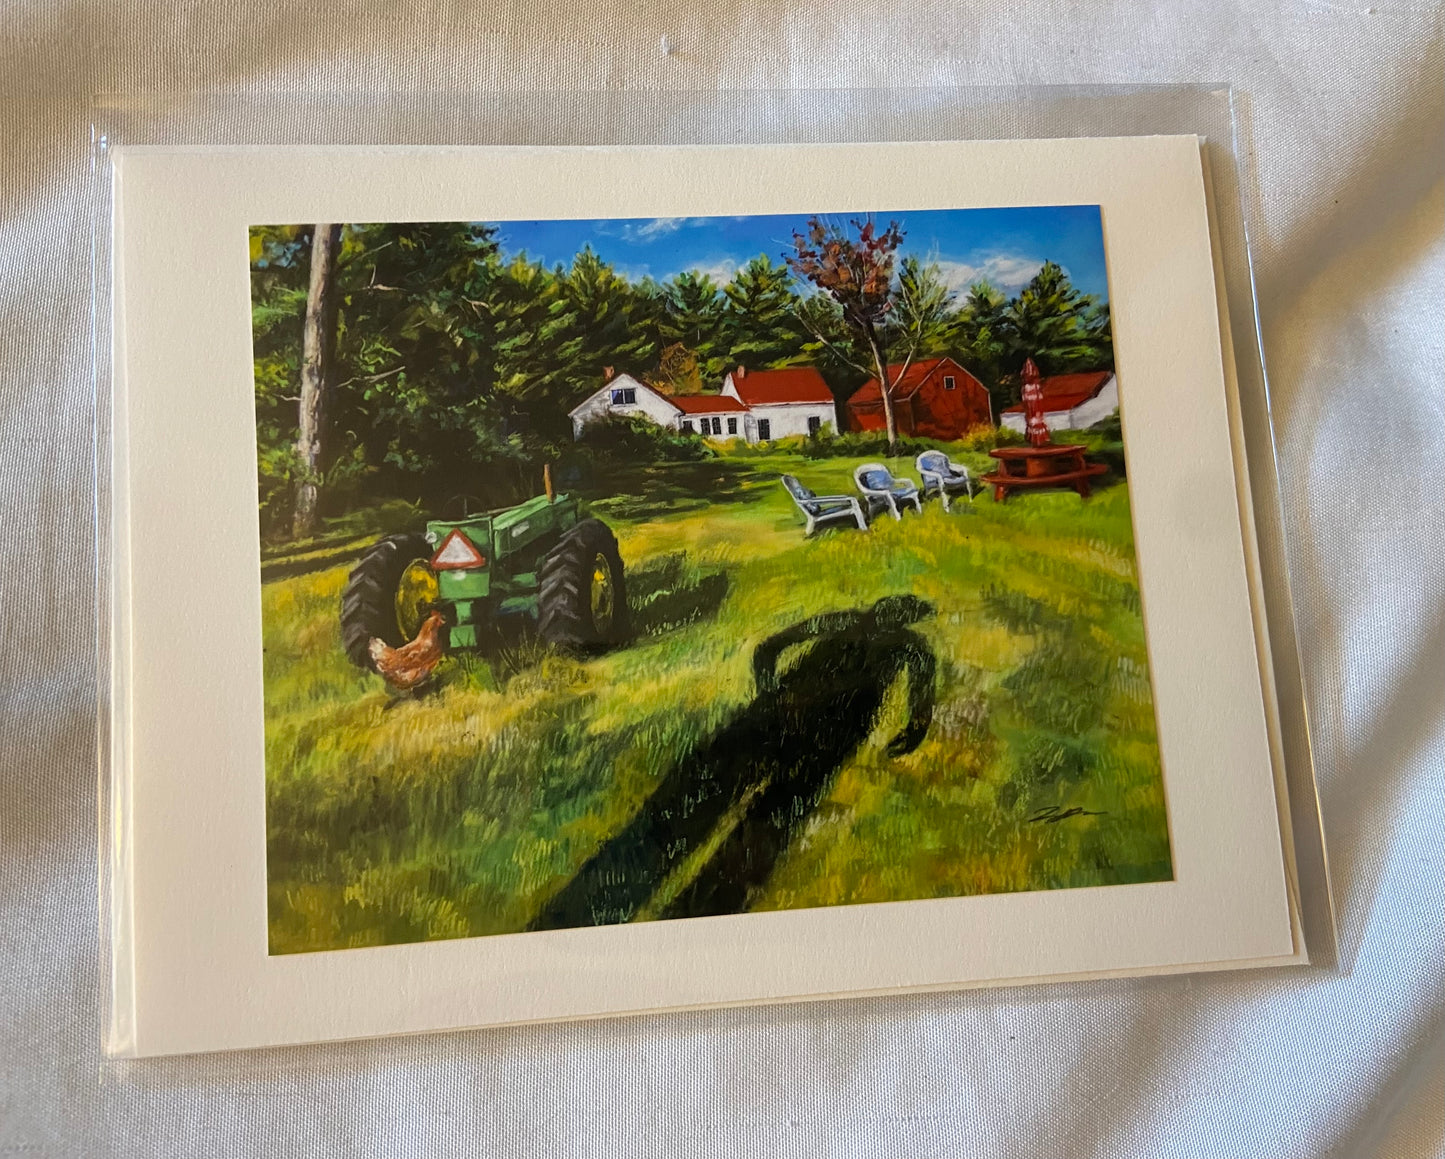 "In Between the Field and the Farm" Card